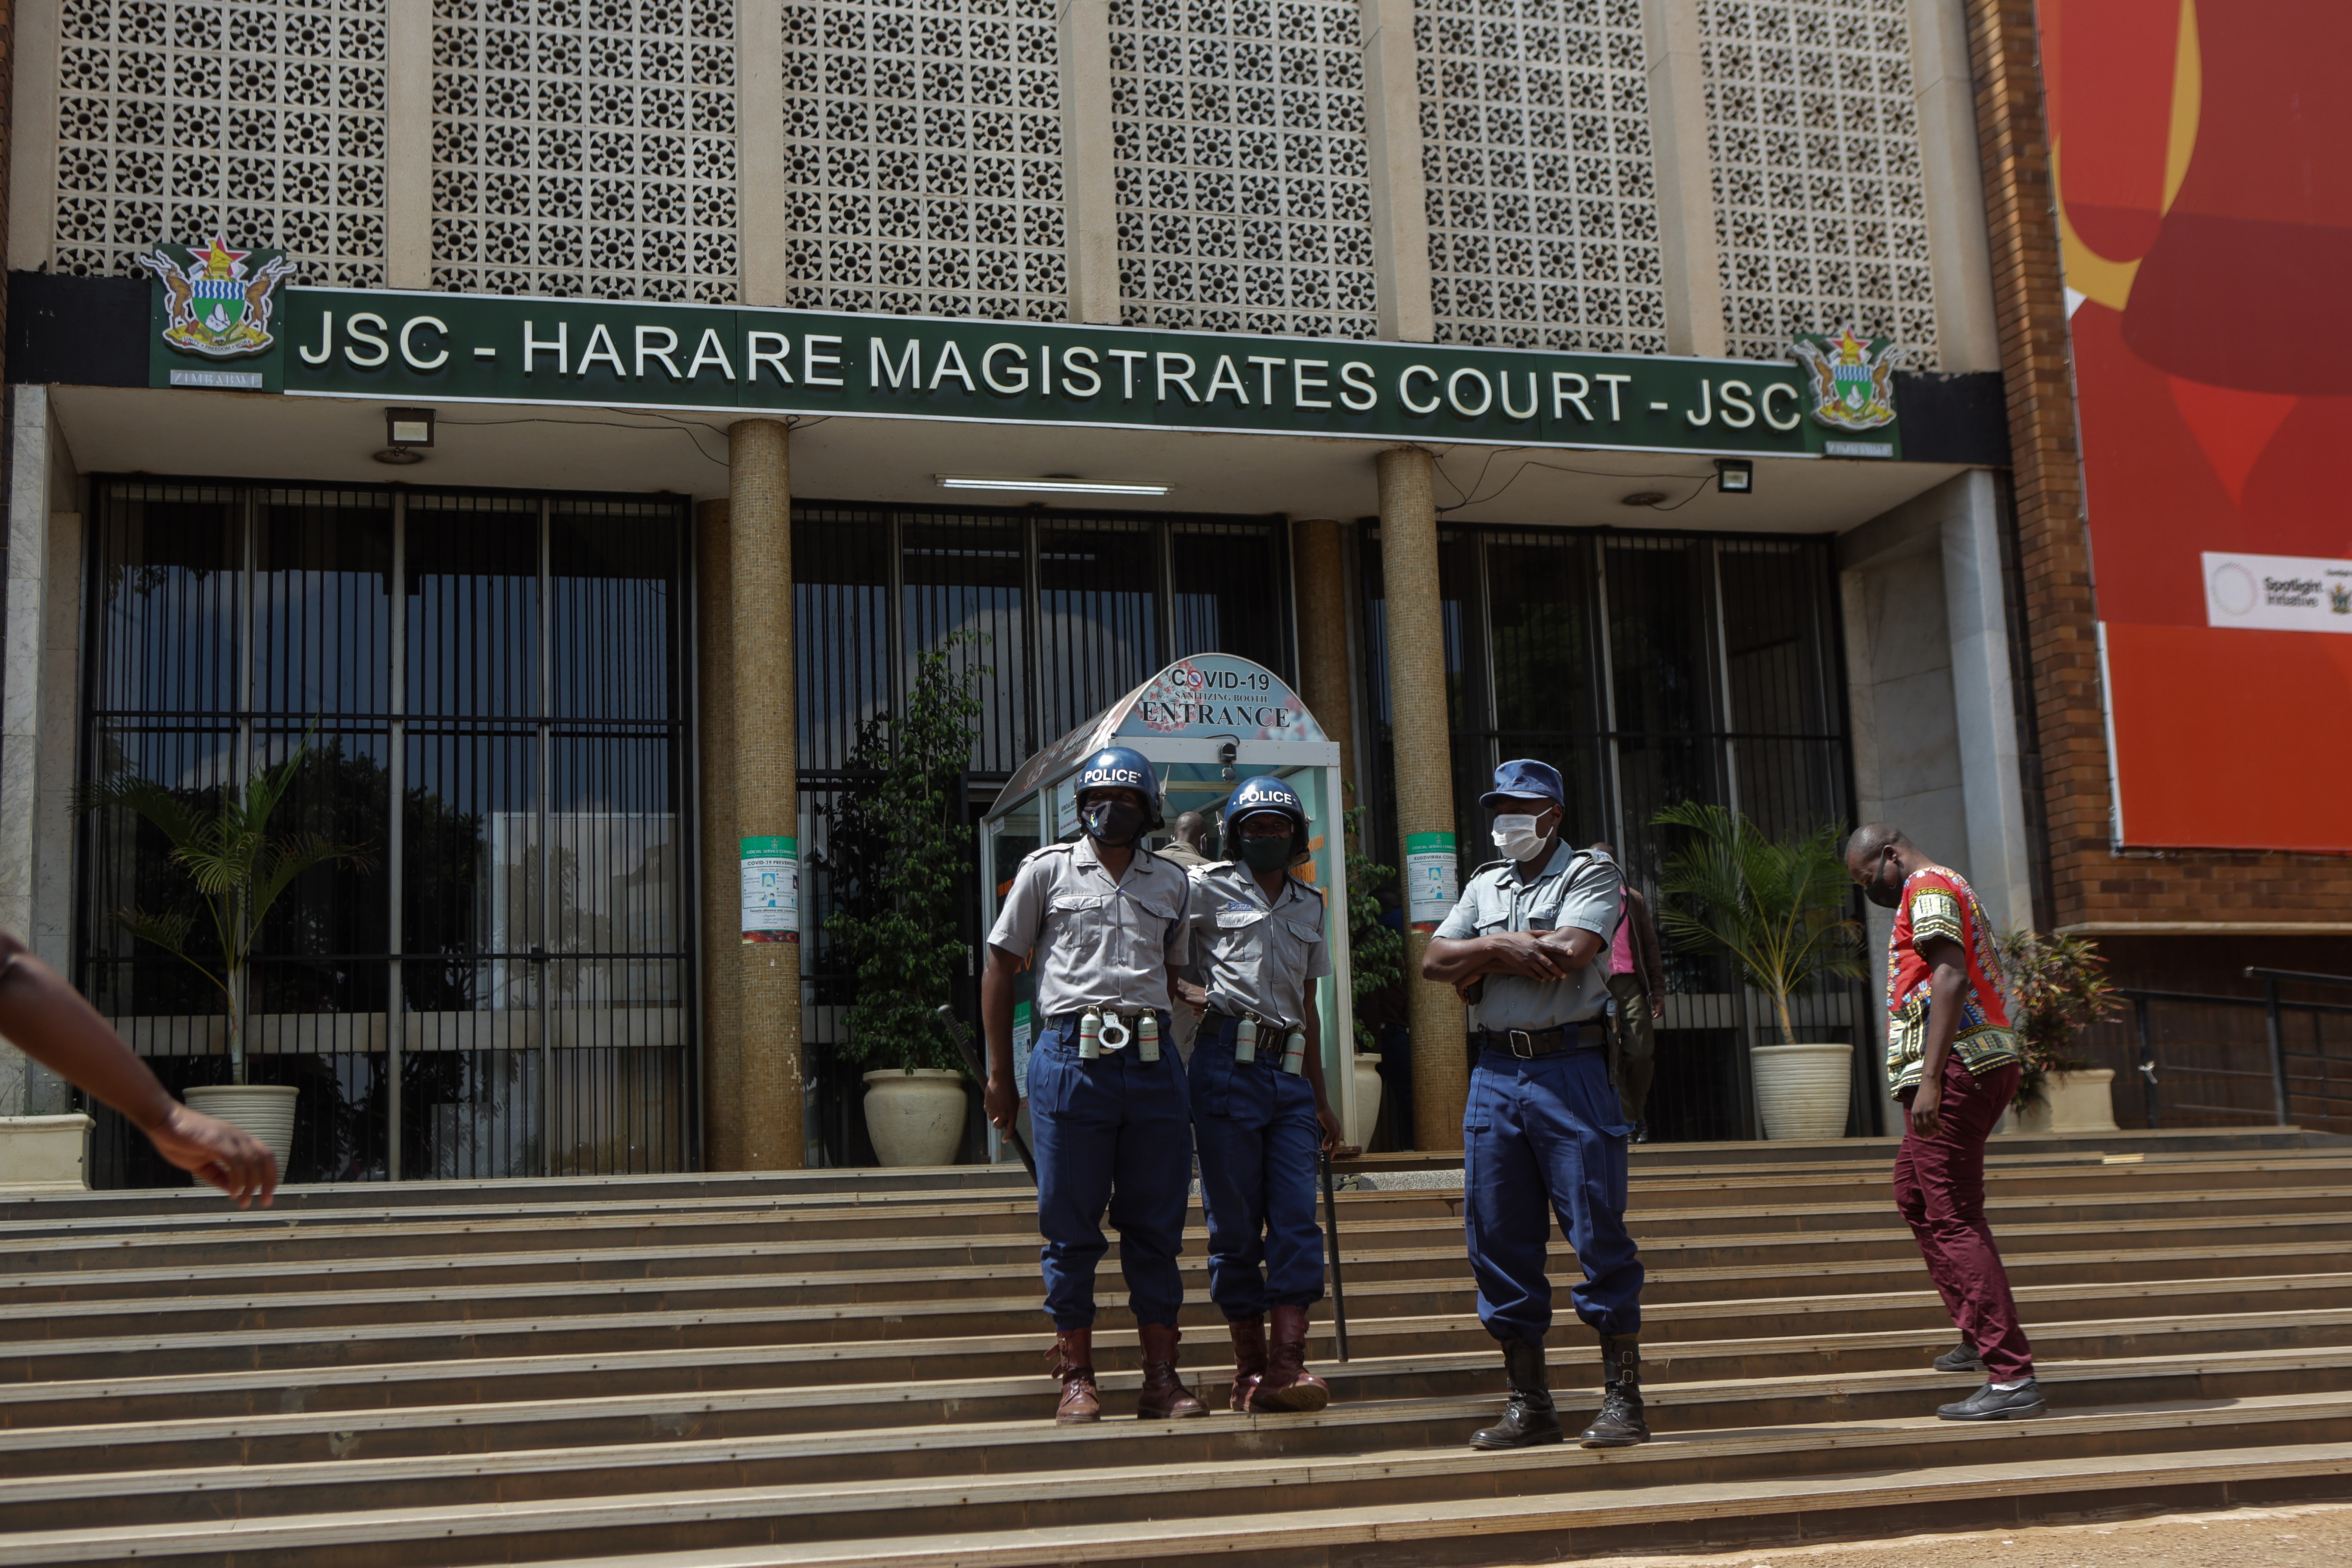 Police officers outside the Magistrates Court in Harare, Zimbabwe, April 6, 2021.